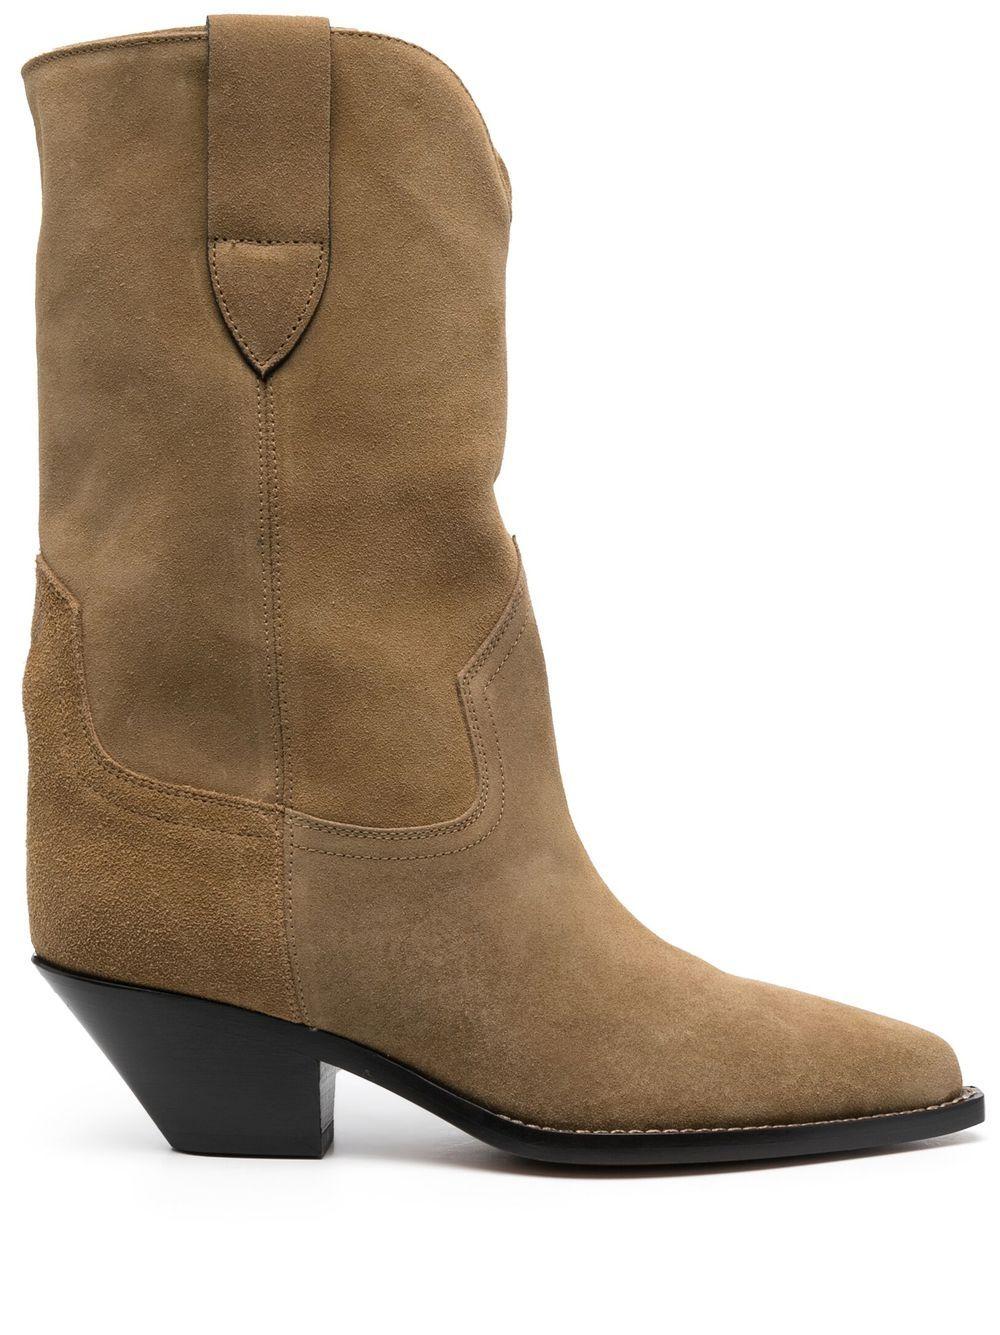 ISABEL MARANT Texan Style Beige Suede Boots for Women